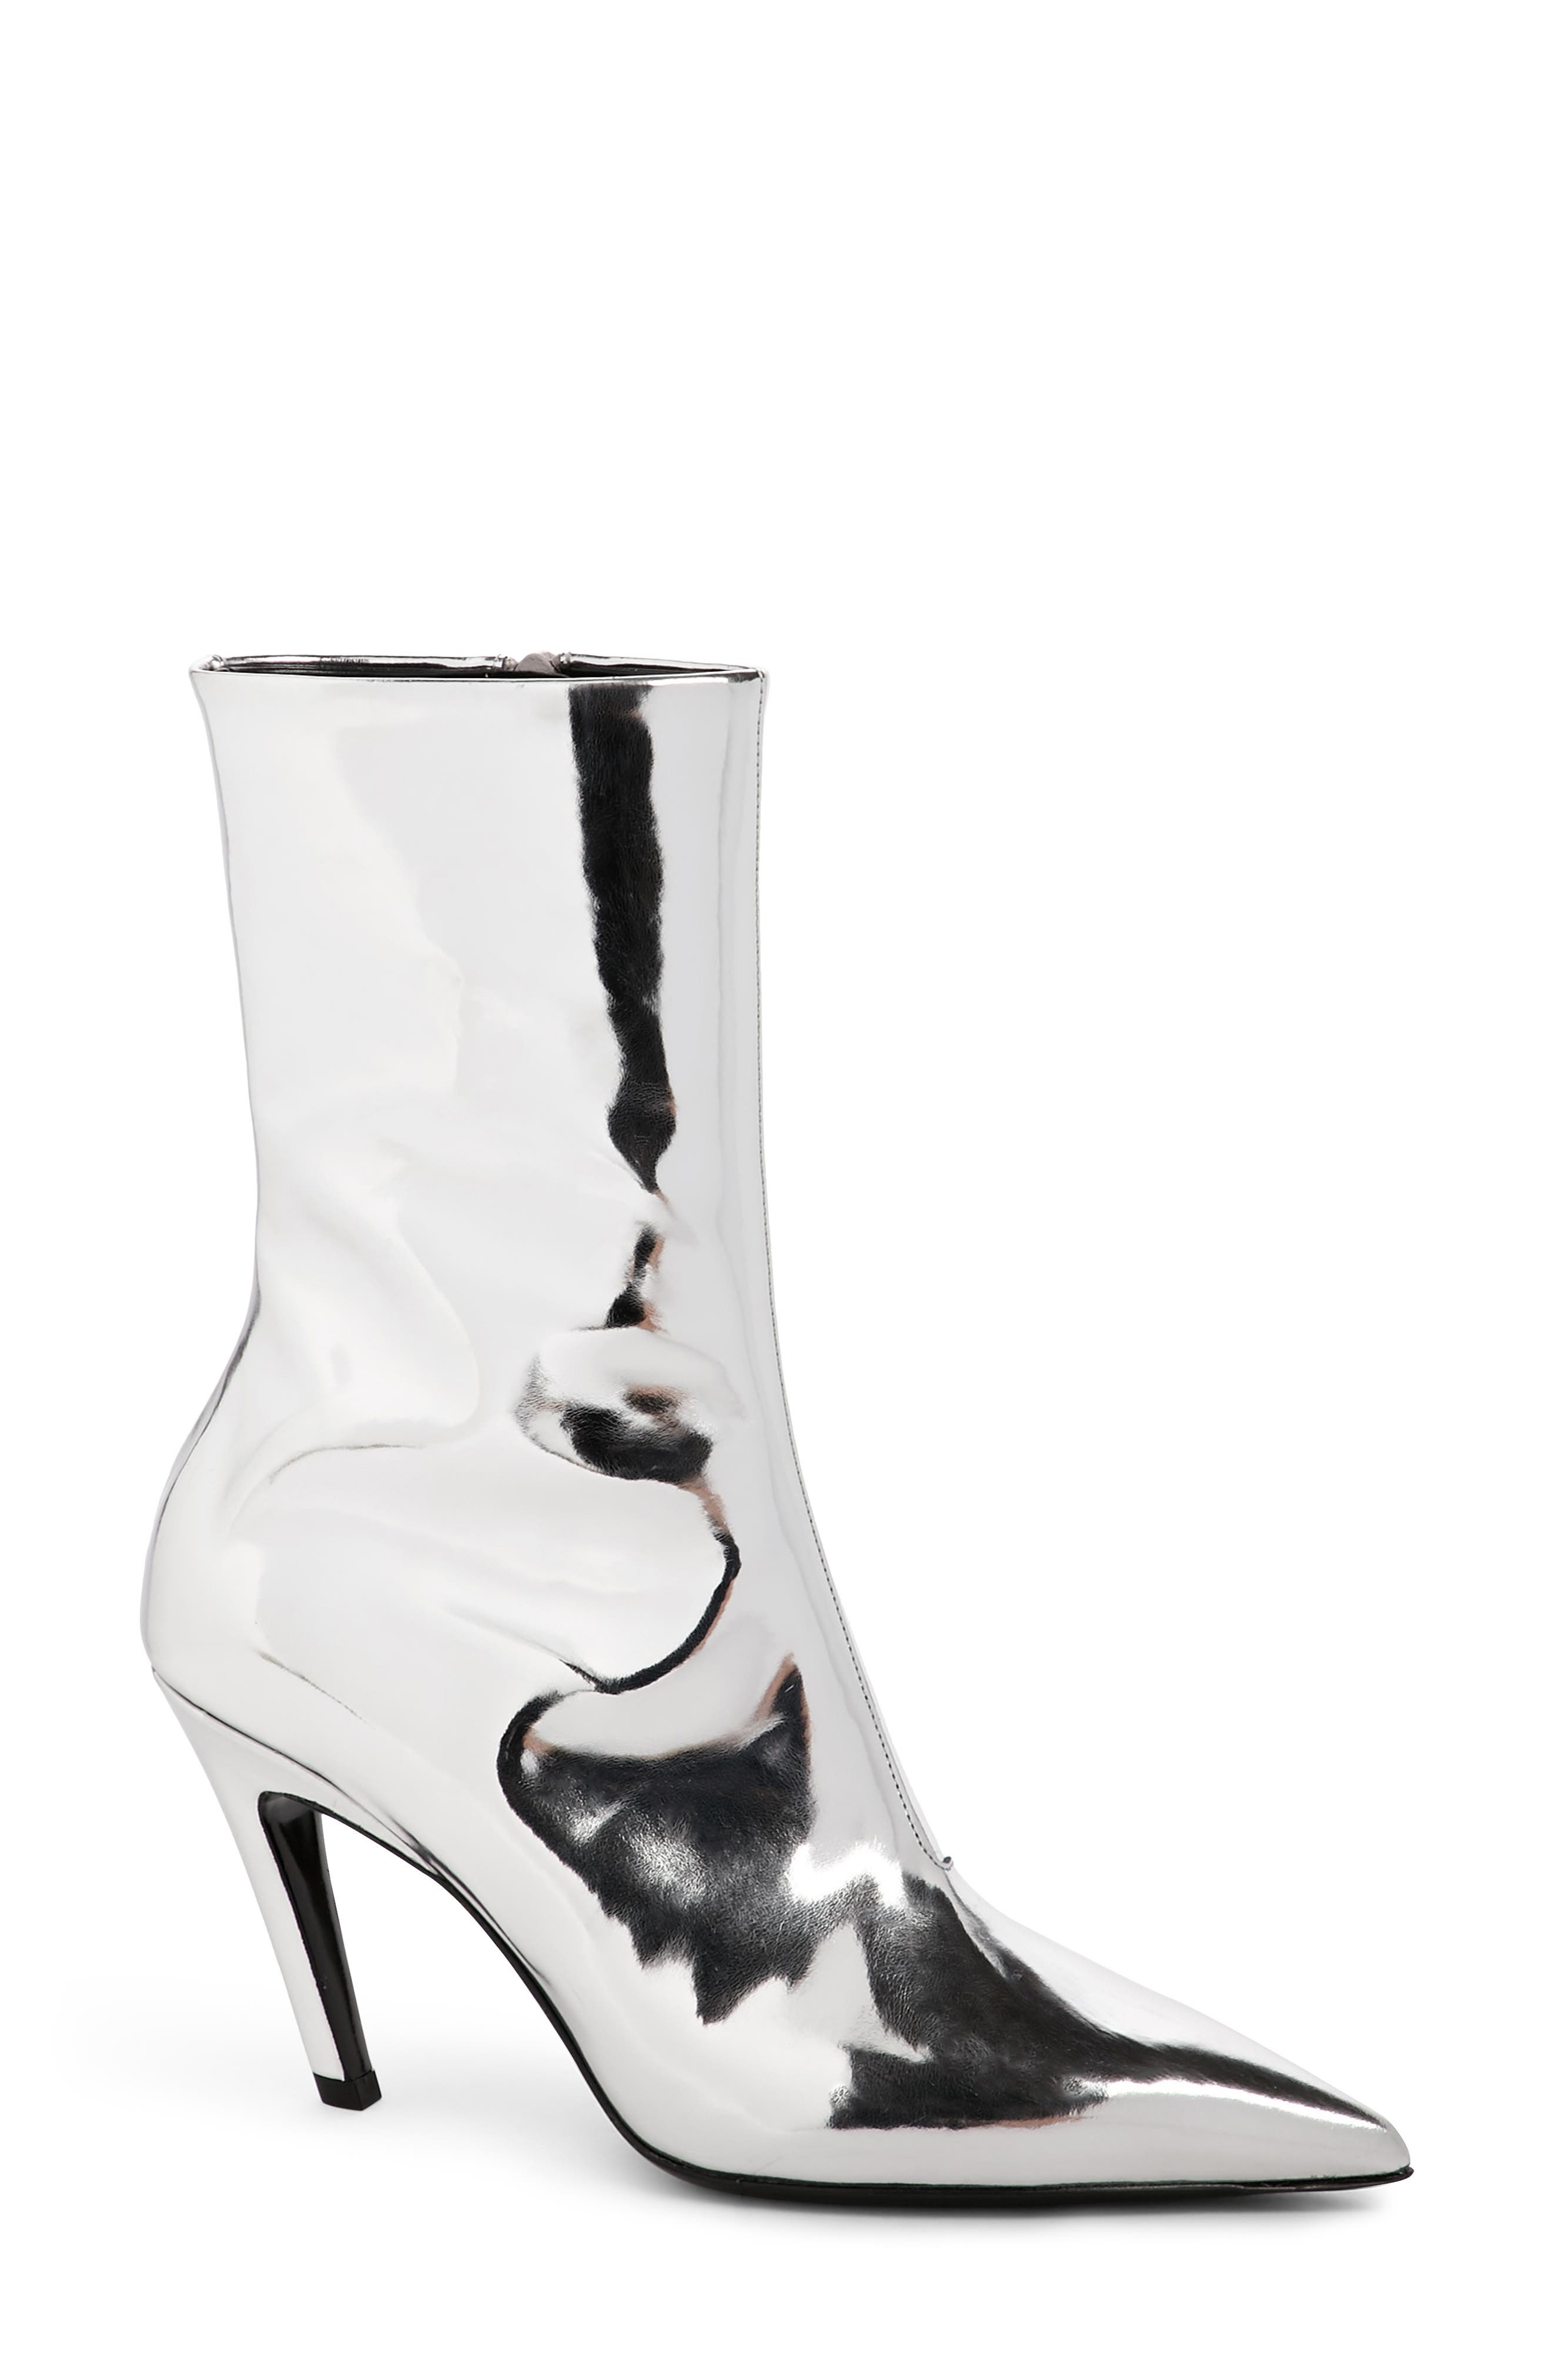 silver boots nordstrom